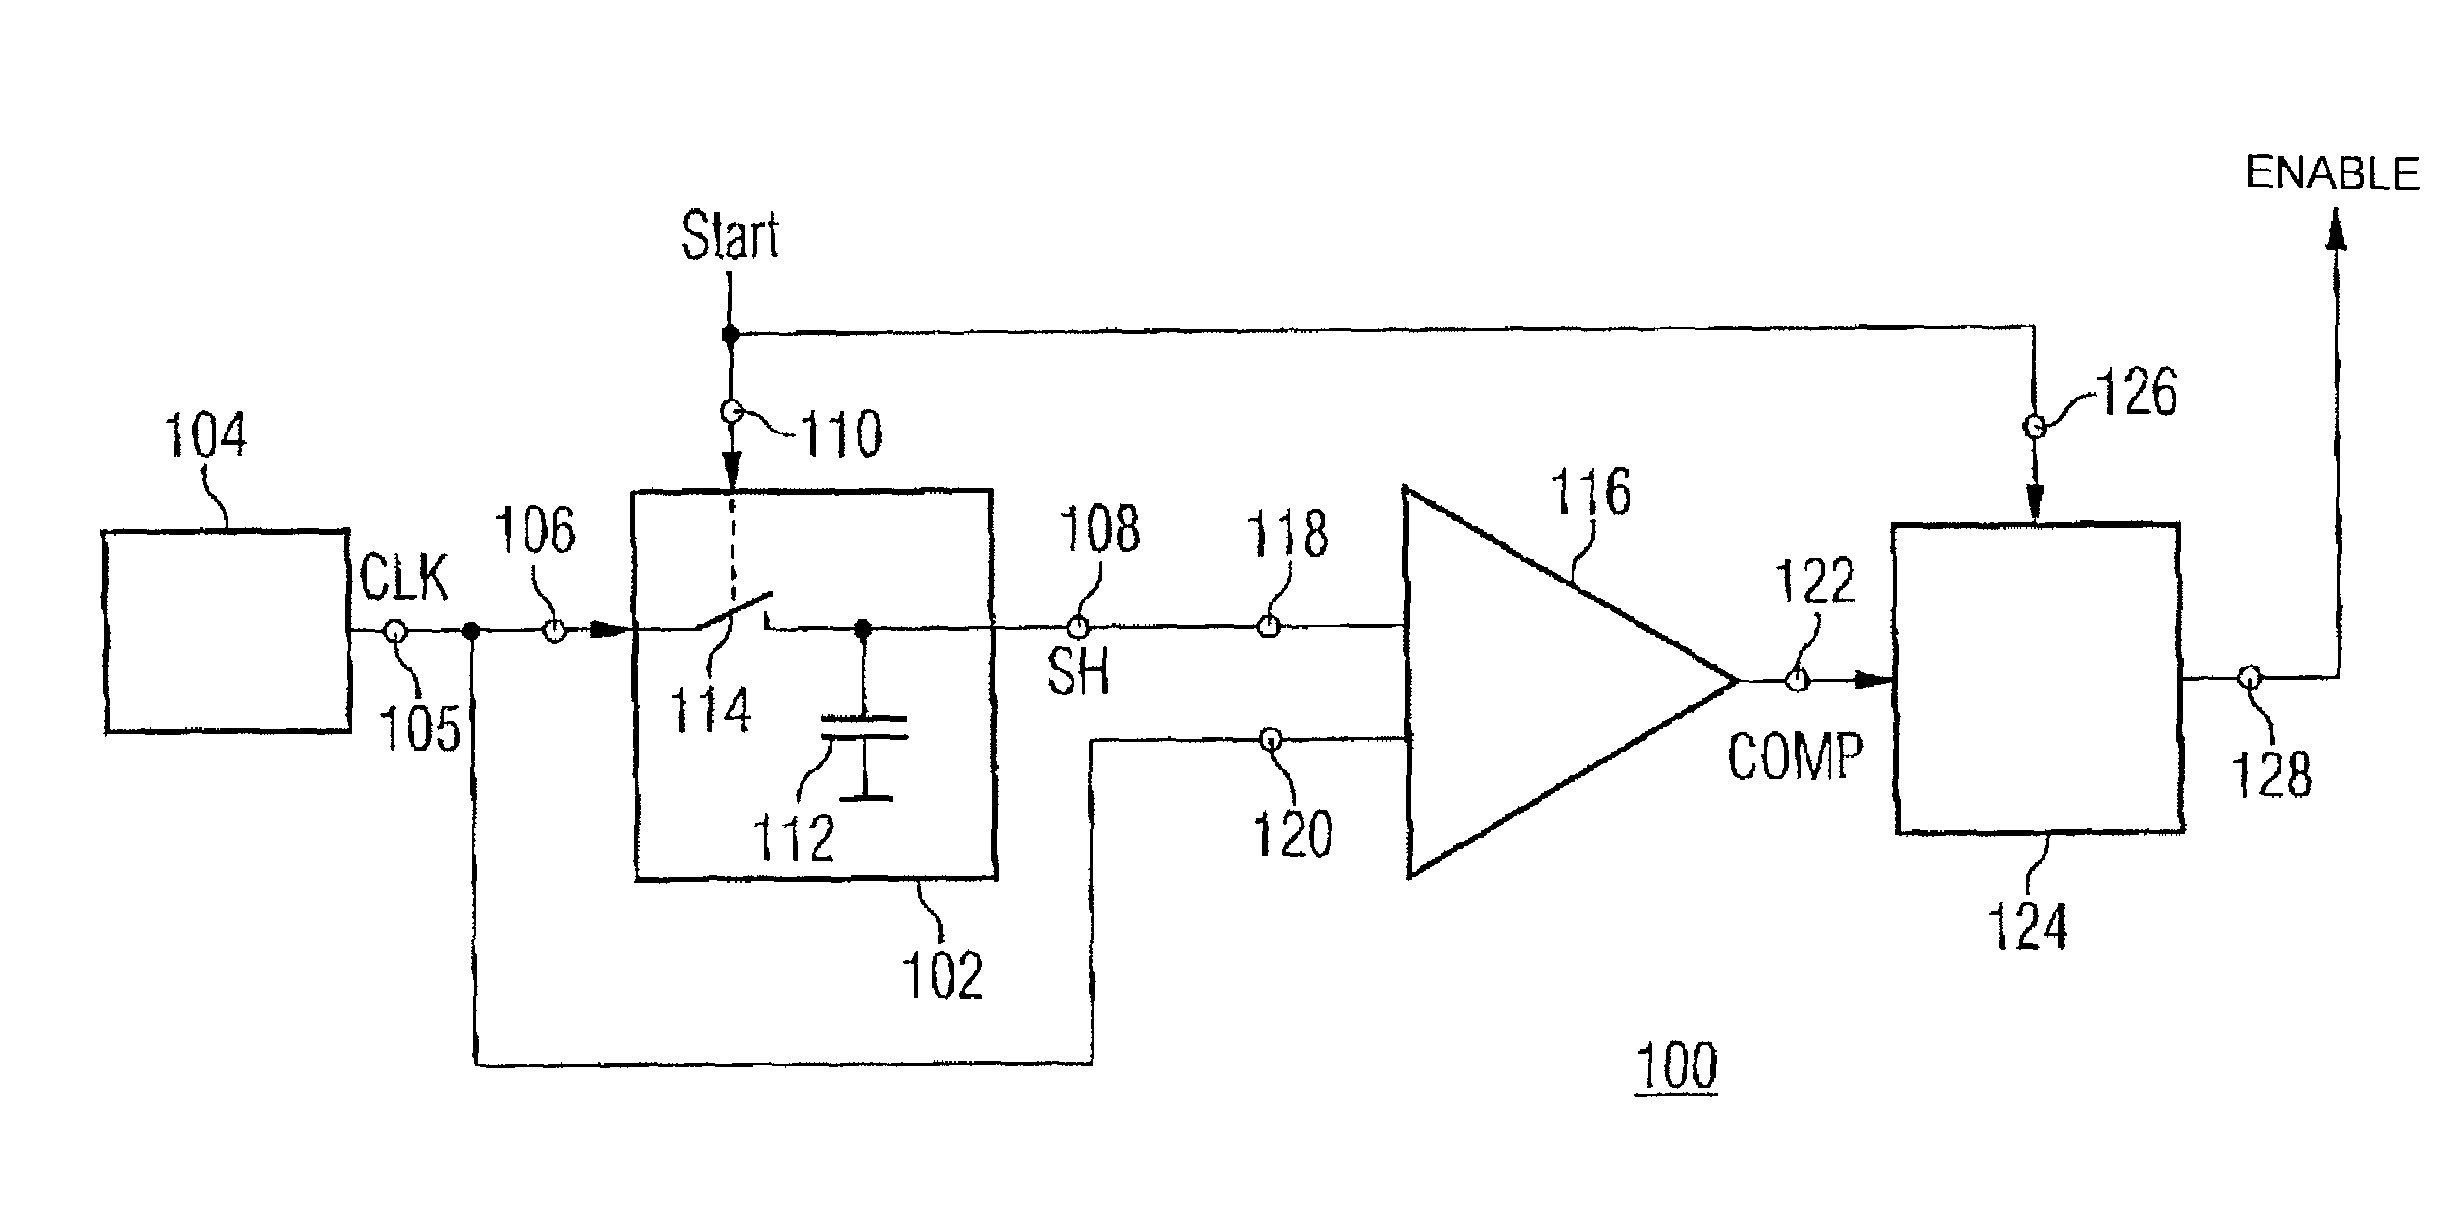 Apparatus for signaling that a predetermined time value has elapsed